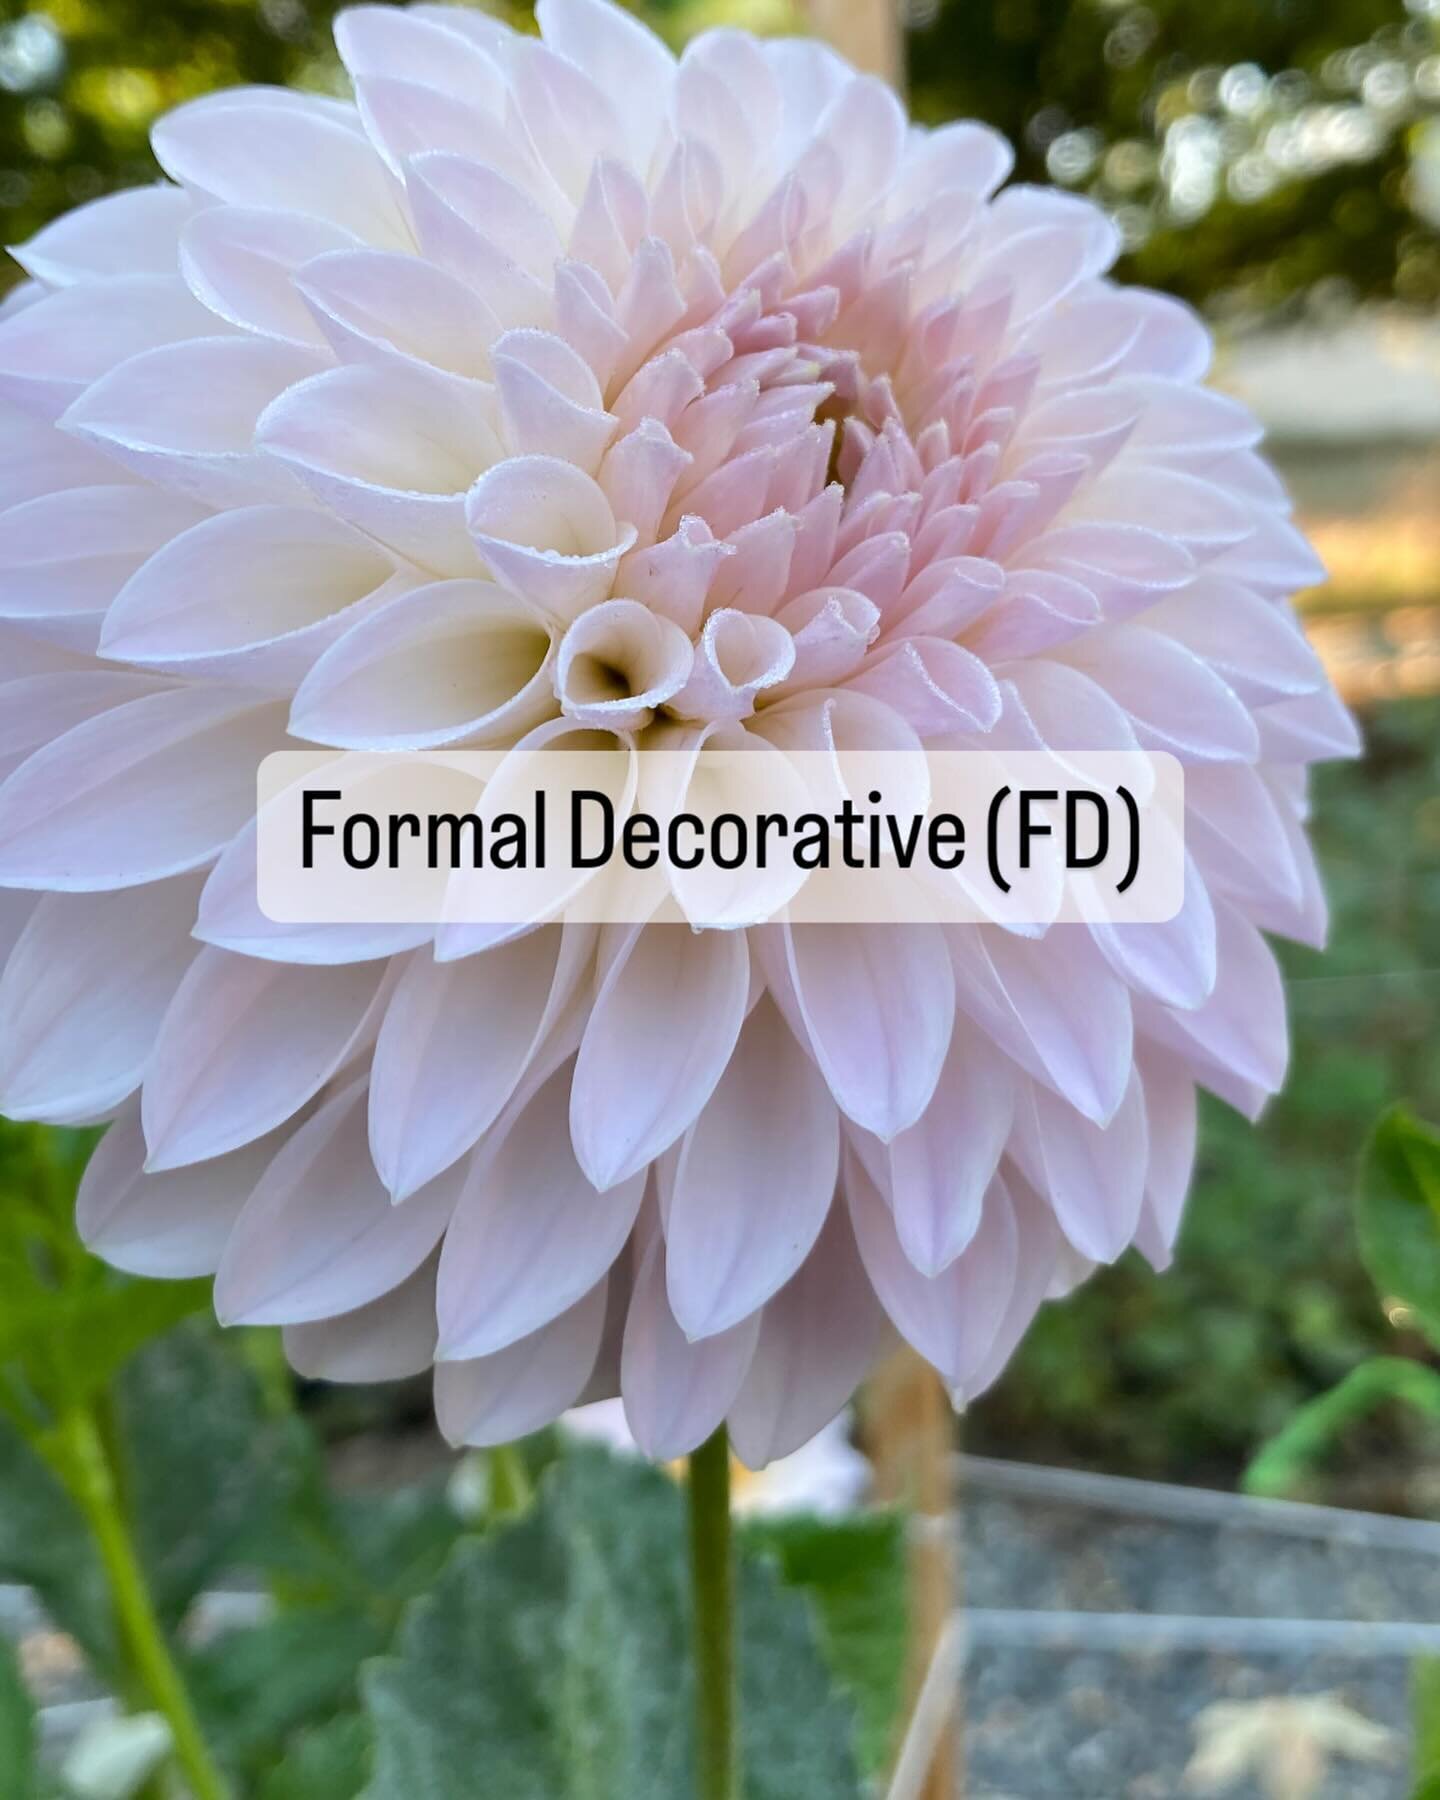 FORM FRIDAY

Formal Decorative dahlias to me are the quintessential dahlia form. When someone mentions dahlia, this is the form that stands out to me as the most uniform, neat, symmetrical flower (even though other forms have these same characteristi